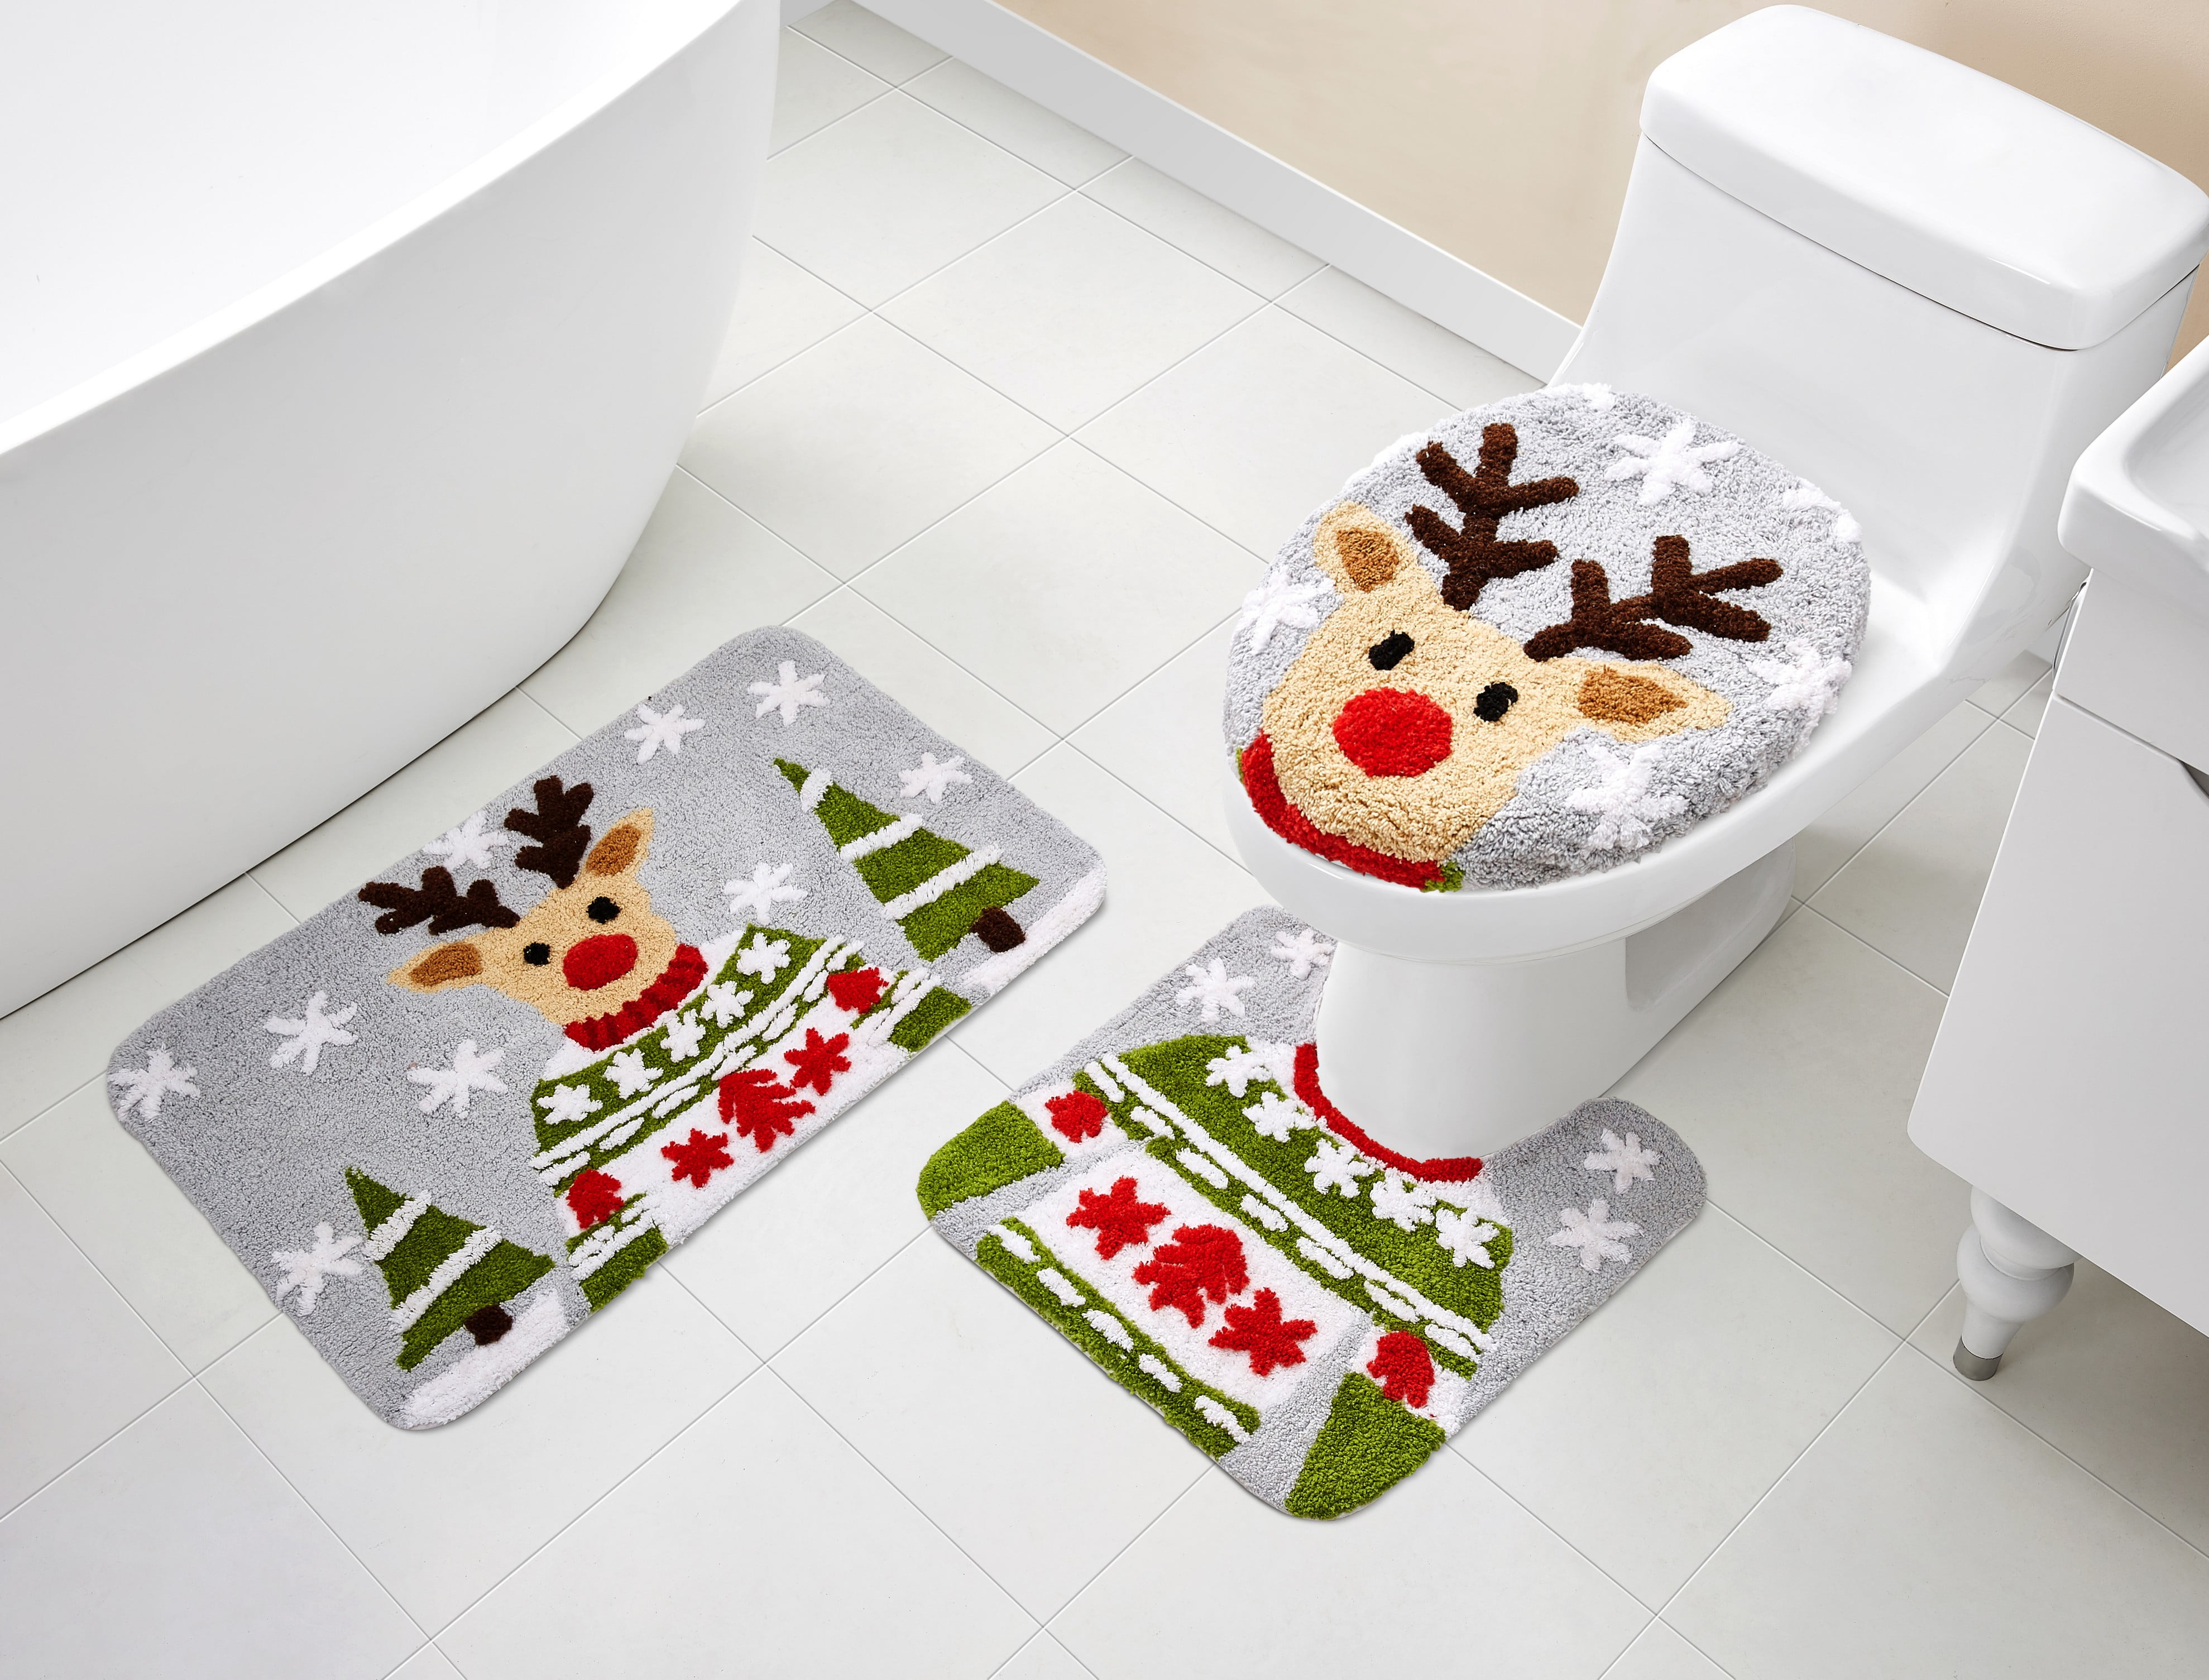 Reindeer Toilet seat cover Bath mats perfect for Christmas in various designs the perfect Christmas decoration 